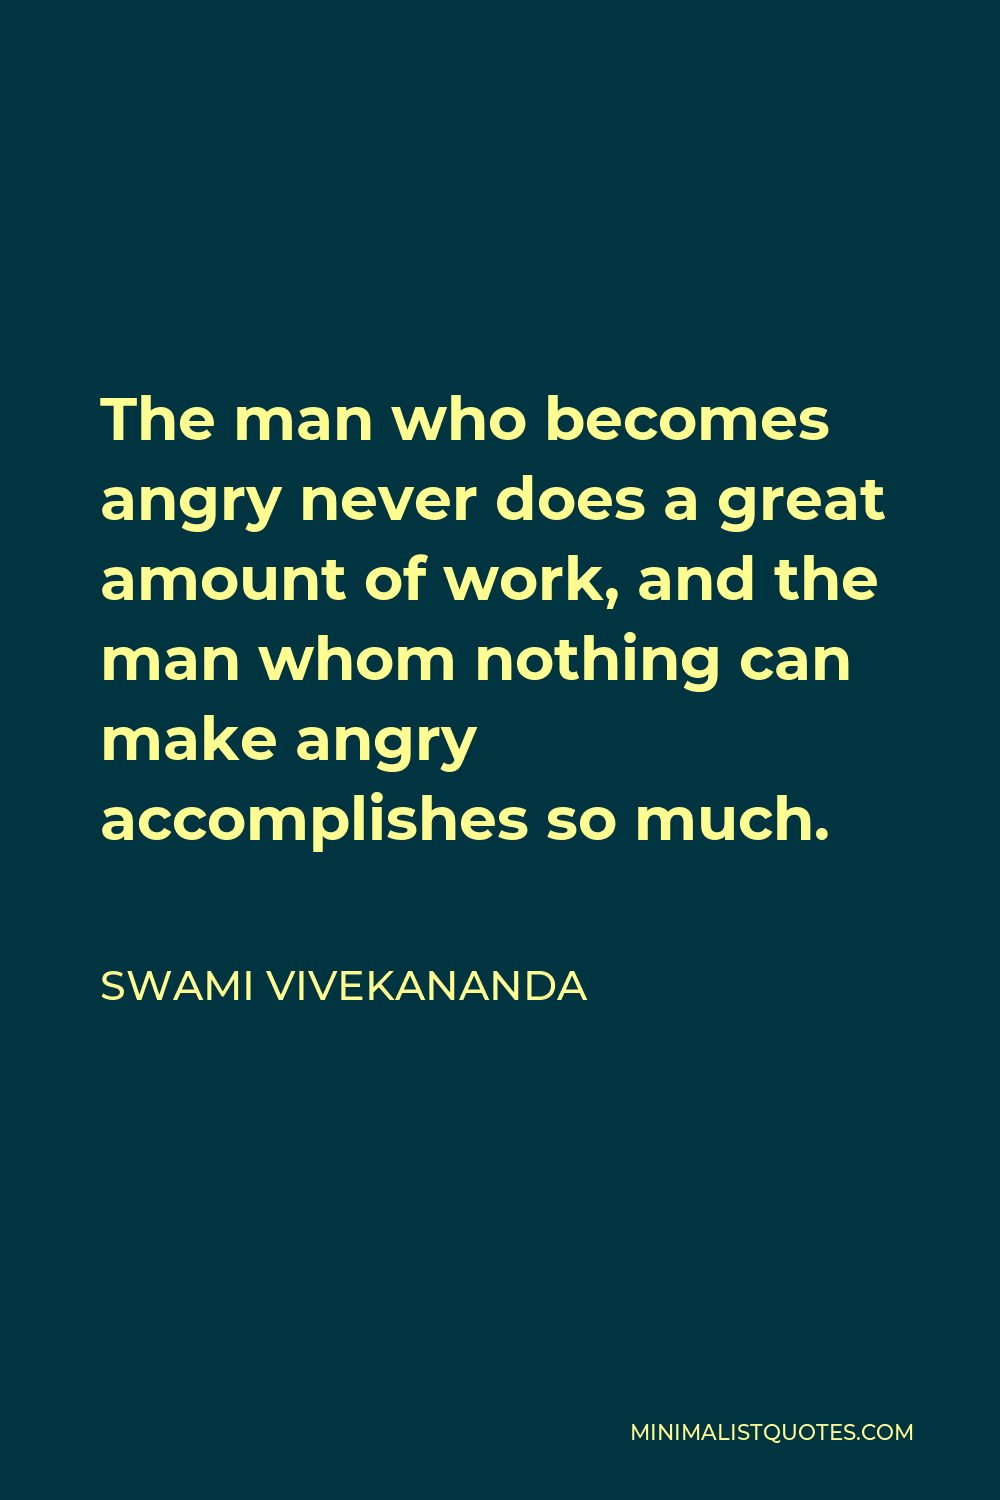 Swami Vivekananda Quote - The man who becomes angry never does a great amount of work, and the man whom nothing can make angry accomplishes so much.